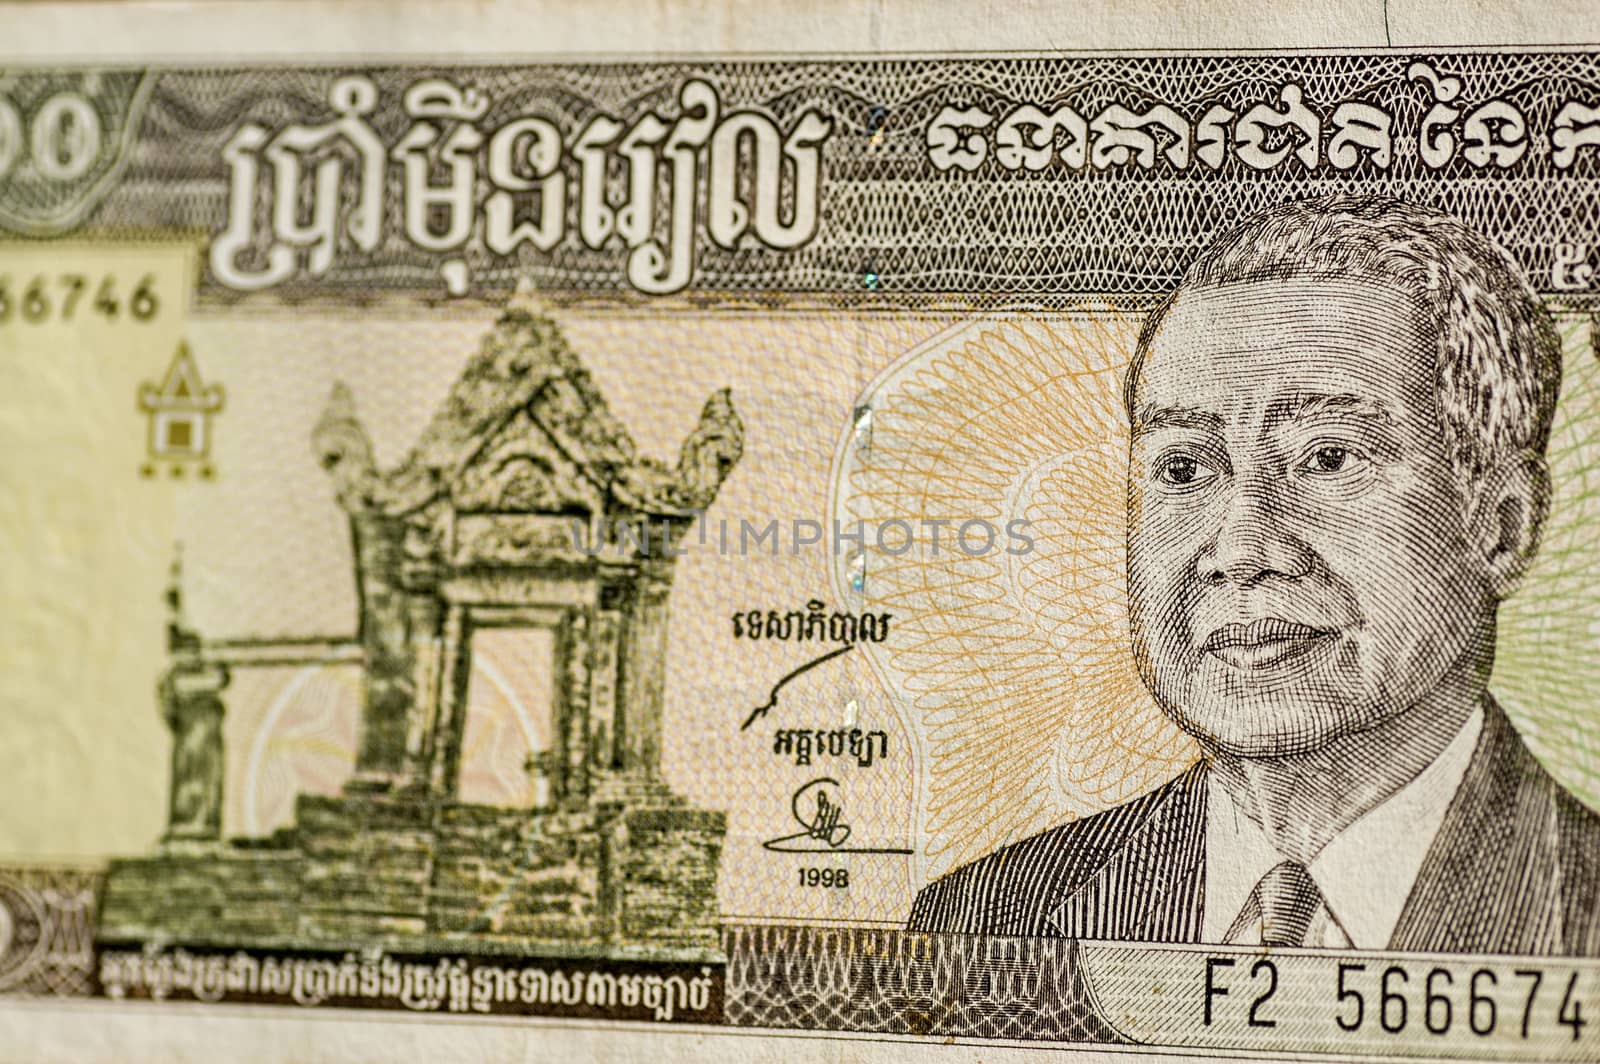 Cambodian banknote for 50,000 Riels showing King Norodom Sihanouk. Used banknote, photographed at an angle.